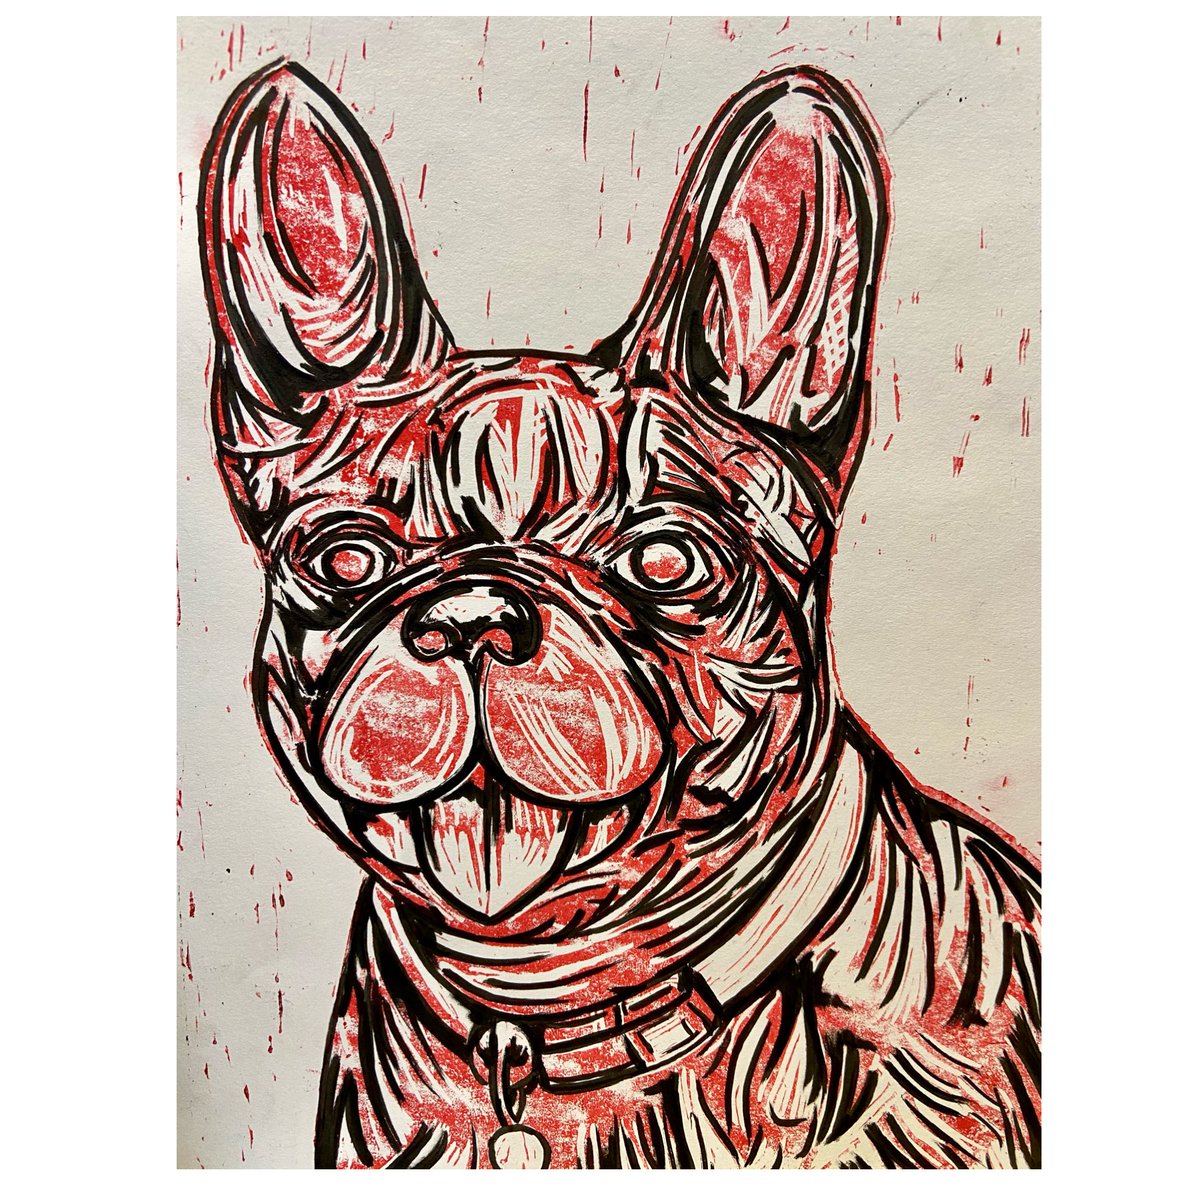 We love dogs! This time a Lino Print by Toby in our Sixth Form. #bablakeathome #bablakeschool #art #bablakeschool #dogartwork #dogartists #linoprint #linoprinting #printing